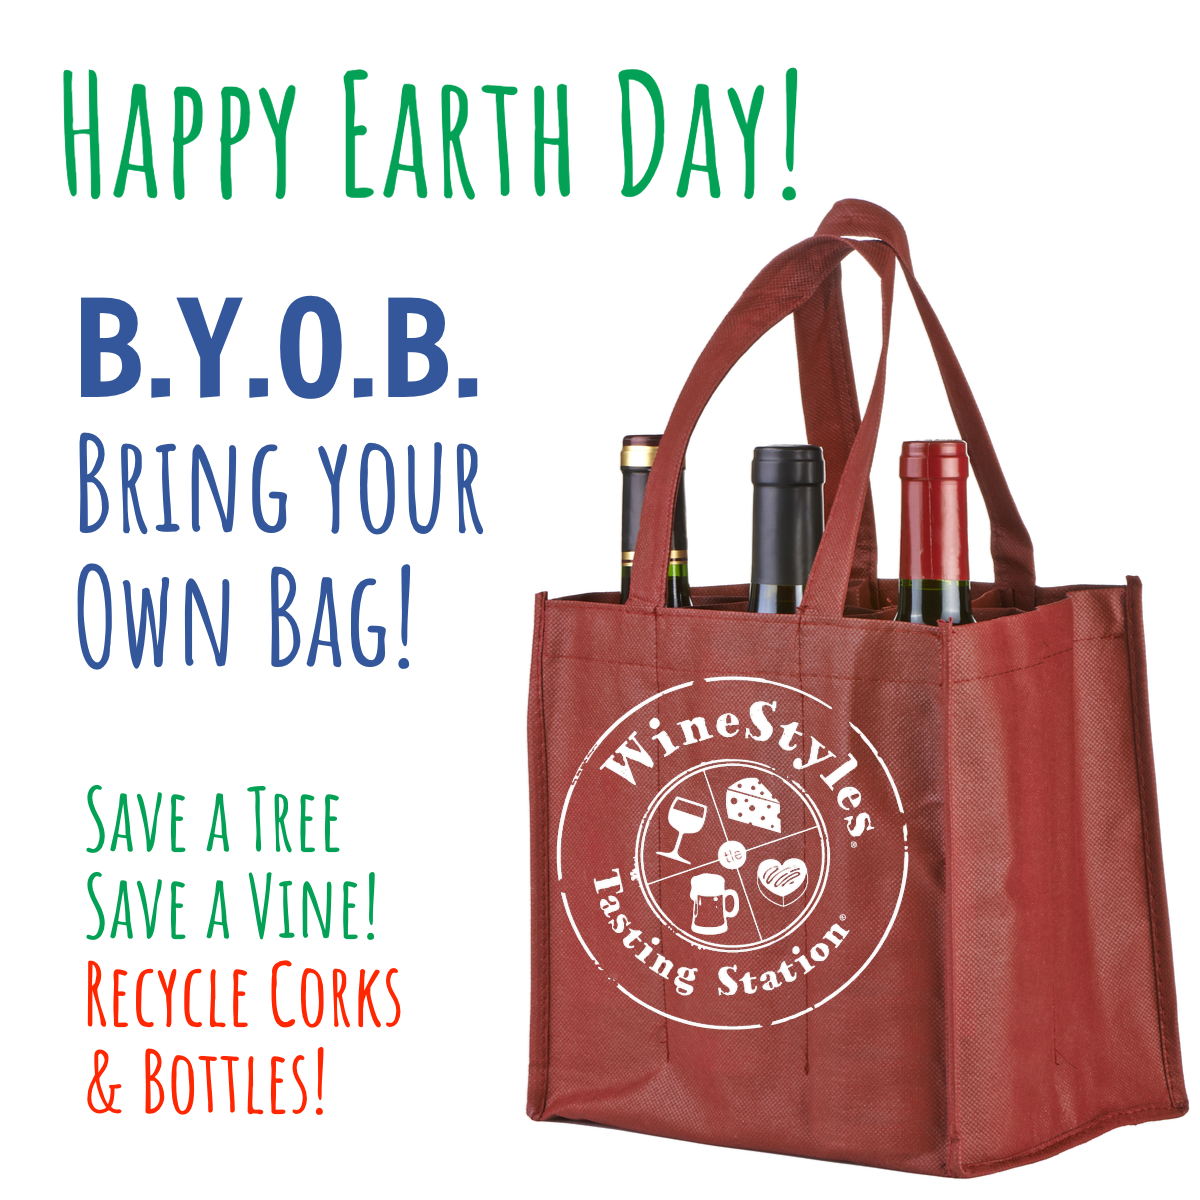 🌱 Sip sustainably this Earth Day! 🍷Grab a glass of organic or SIP certified wines! Because when you choose sustainability, every sip feels even better! #EarthDay #SustainableCheers #OrganicWines #SIPcertified #Recycle #UpCycle #EarthDay2024 @earthday